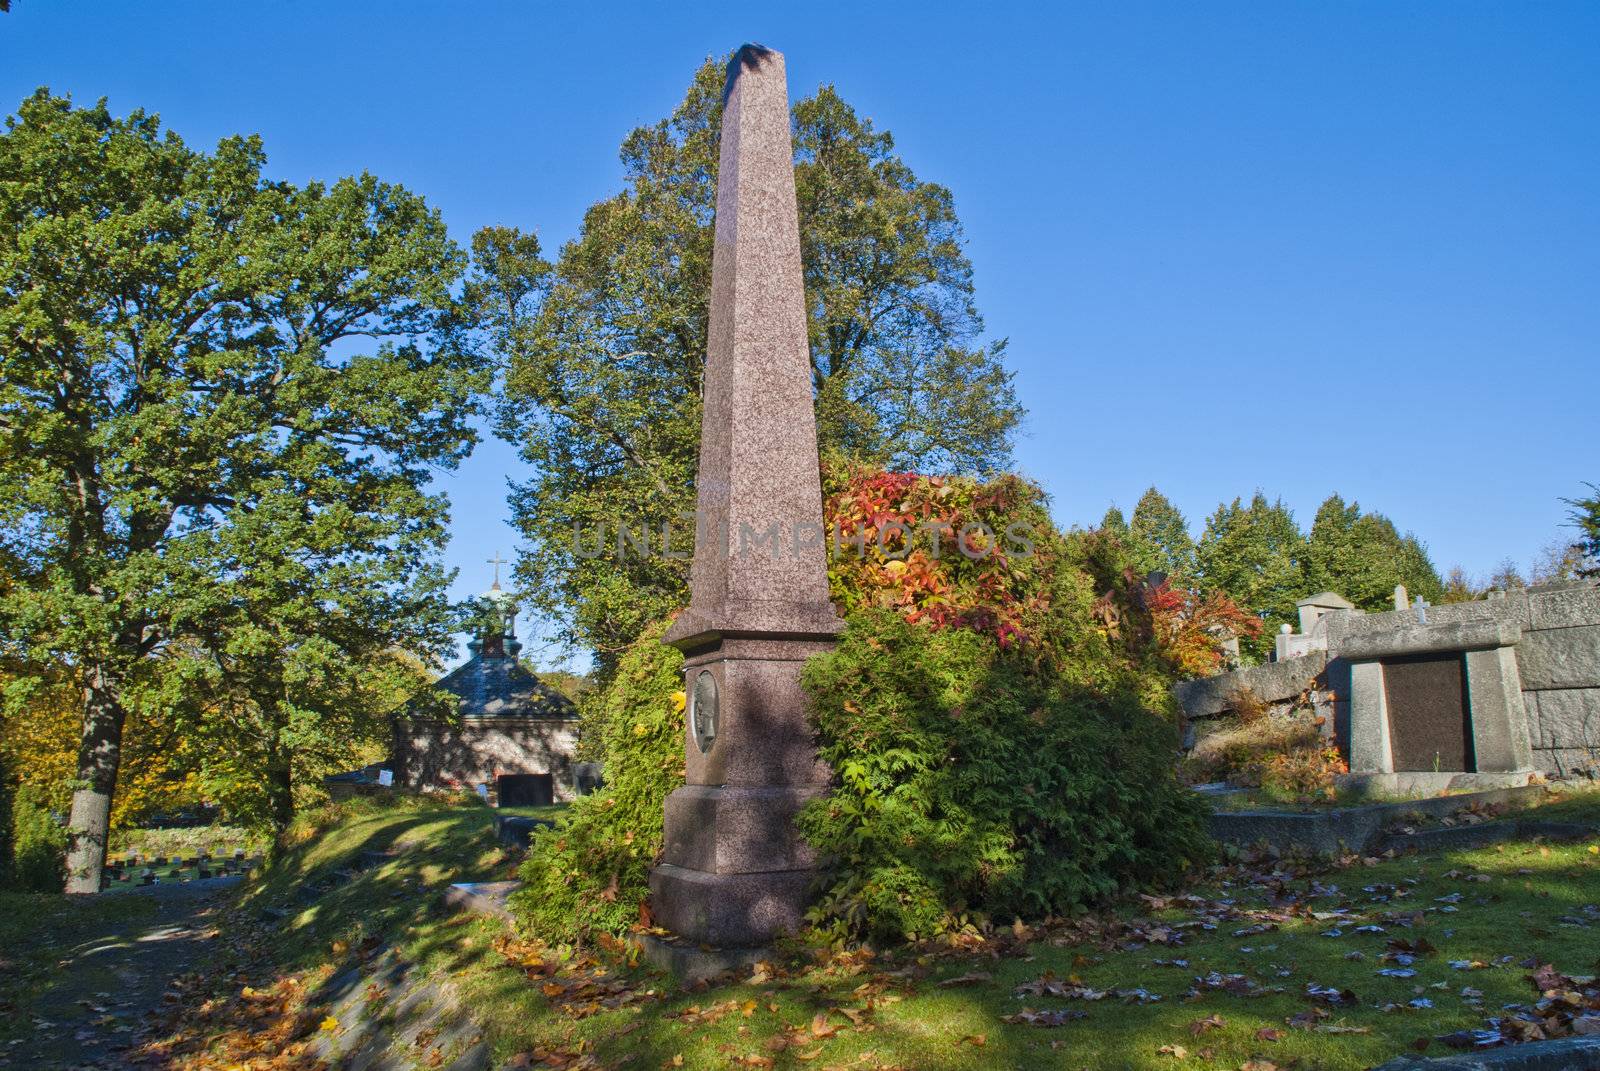 on the os cemetery in halden, there are several old grave monuments, image is shot inside the cemetery. picture shows os cemetery located in the center of halden